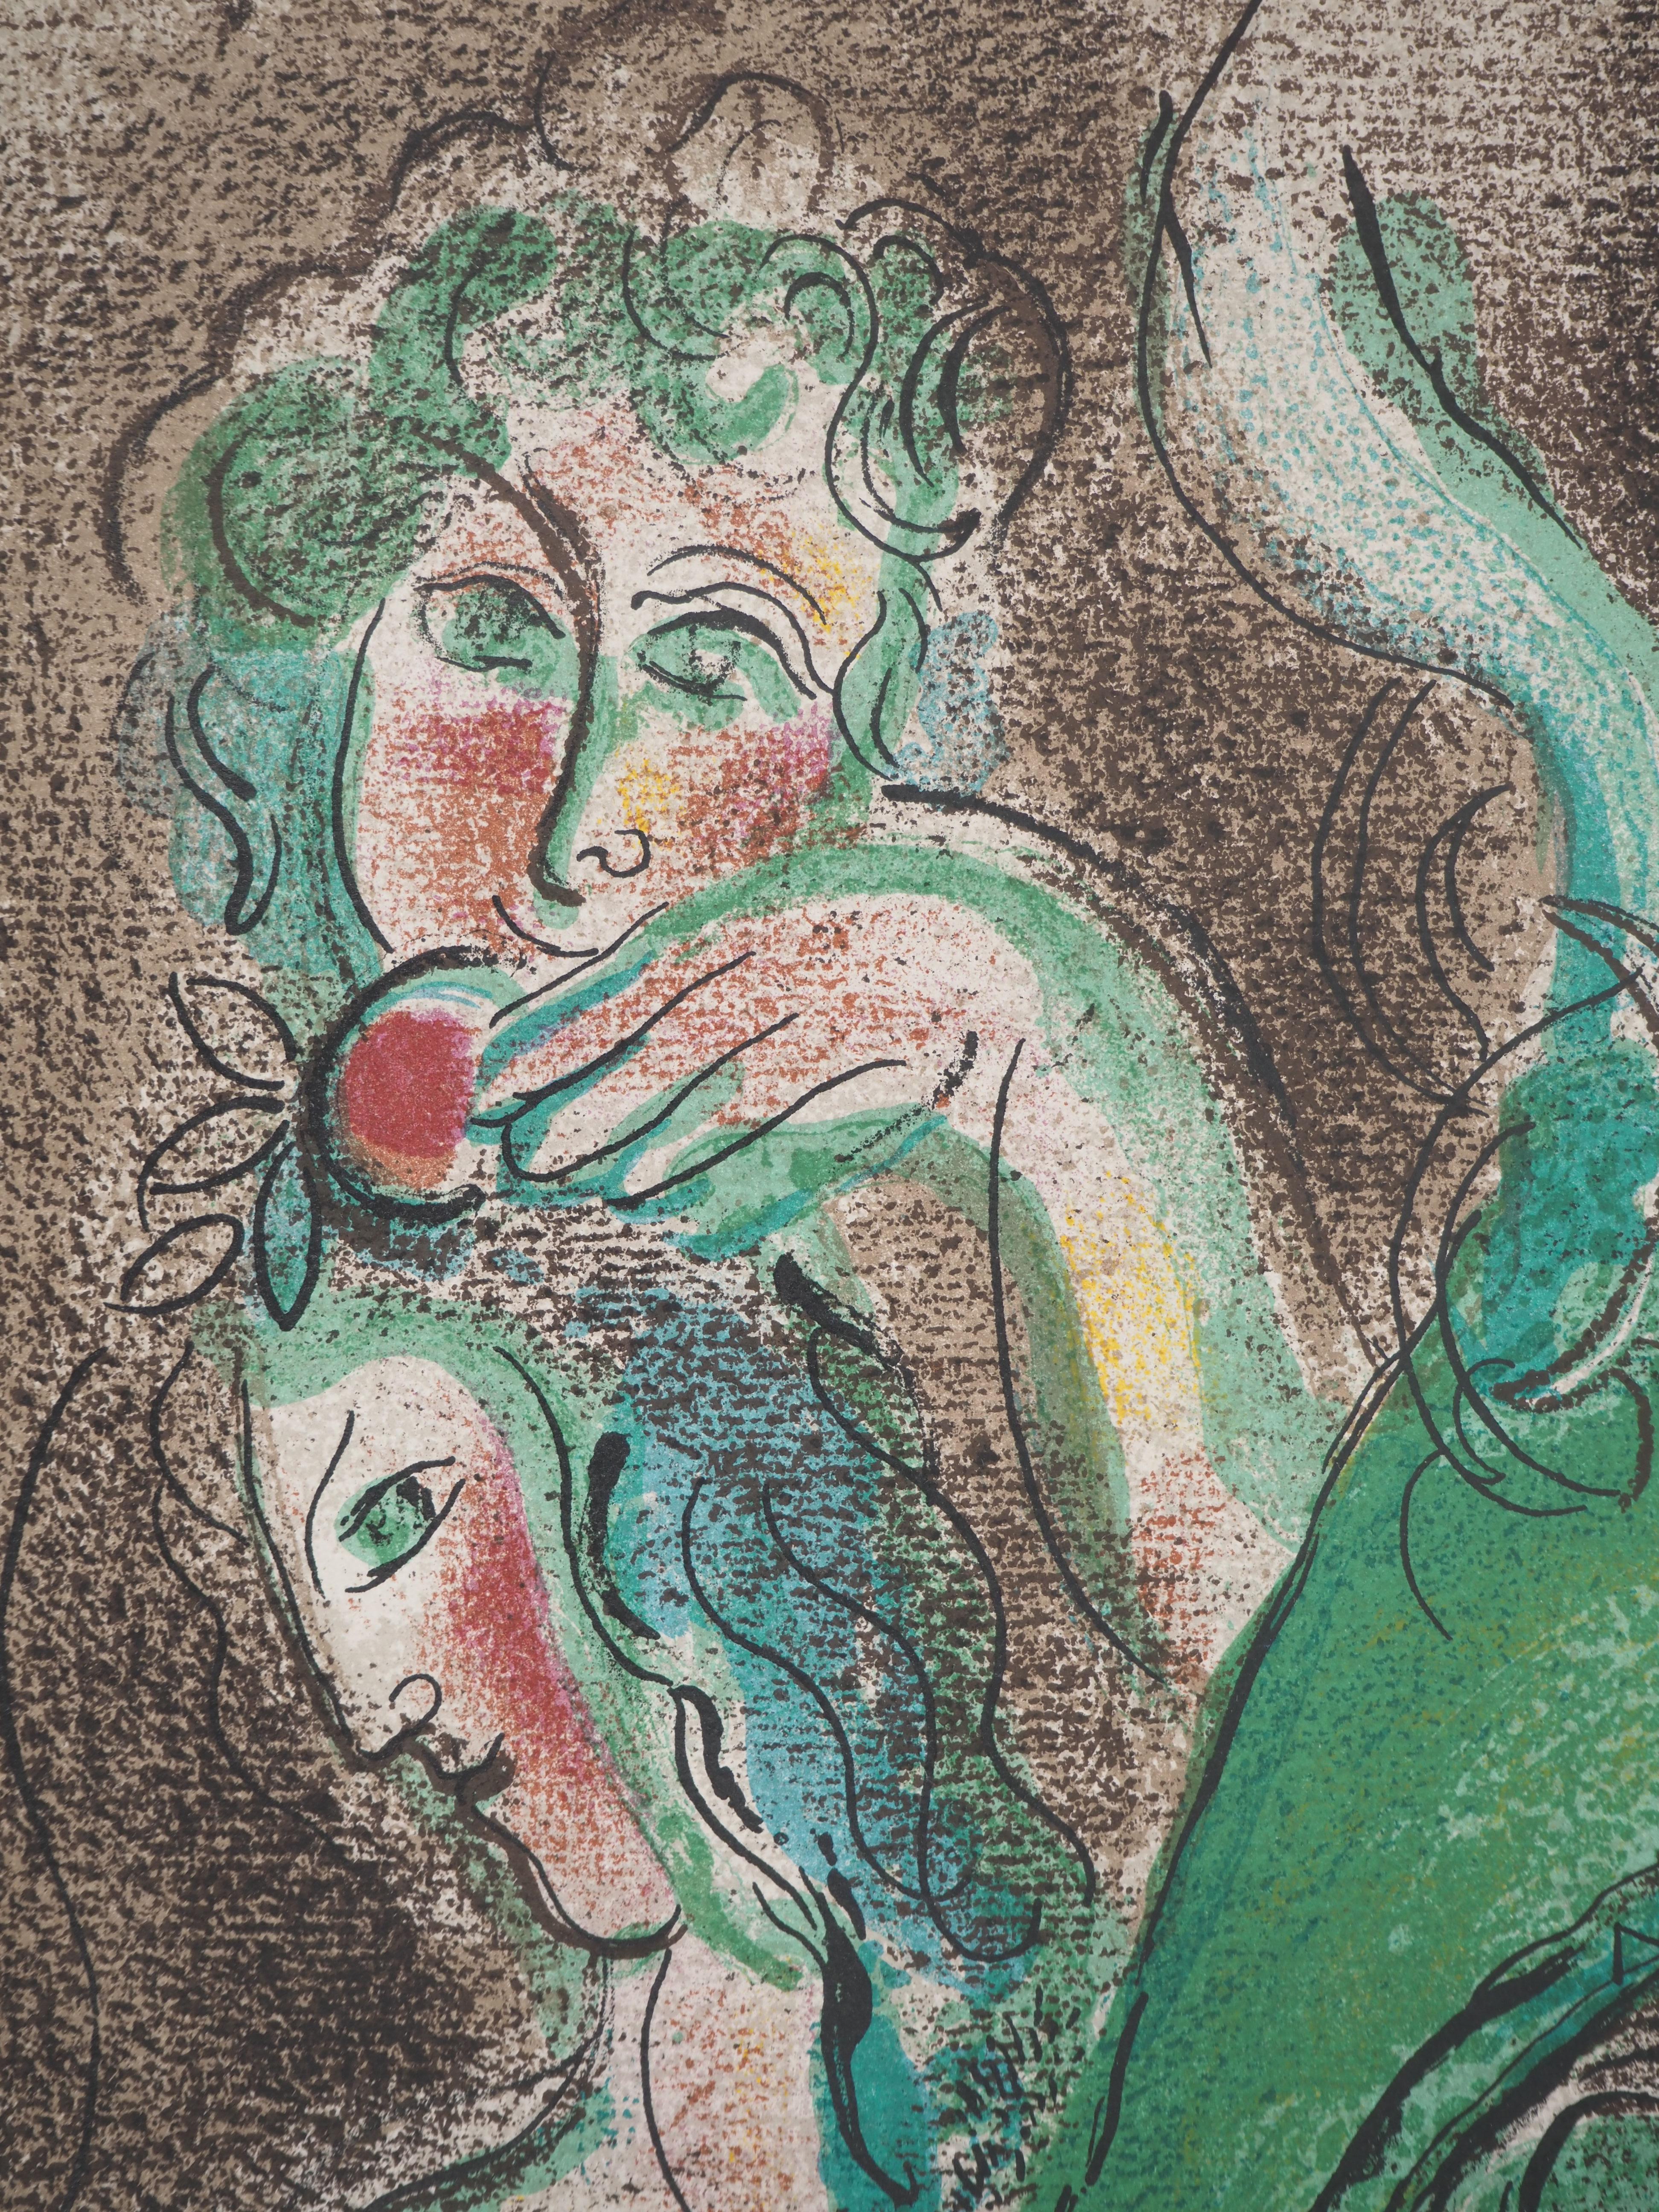 Marc Chagall (1887-1985) 
The Bible, Adam and Eve in Paradise, 1960

Original lithograph (Mourlot Workshop) 
On paper 36 x 26.5 cm (c. 14.2 x 10.2 in)
Second illustration on the back, see last picture (Mourlot #256) 

REFERENCE: 
Catalogue raisonné